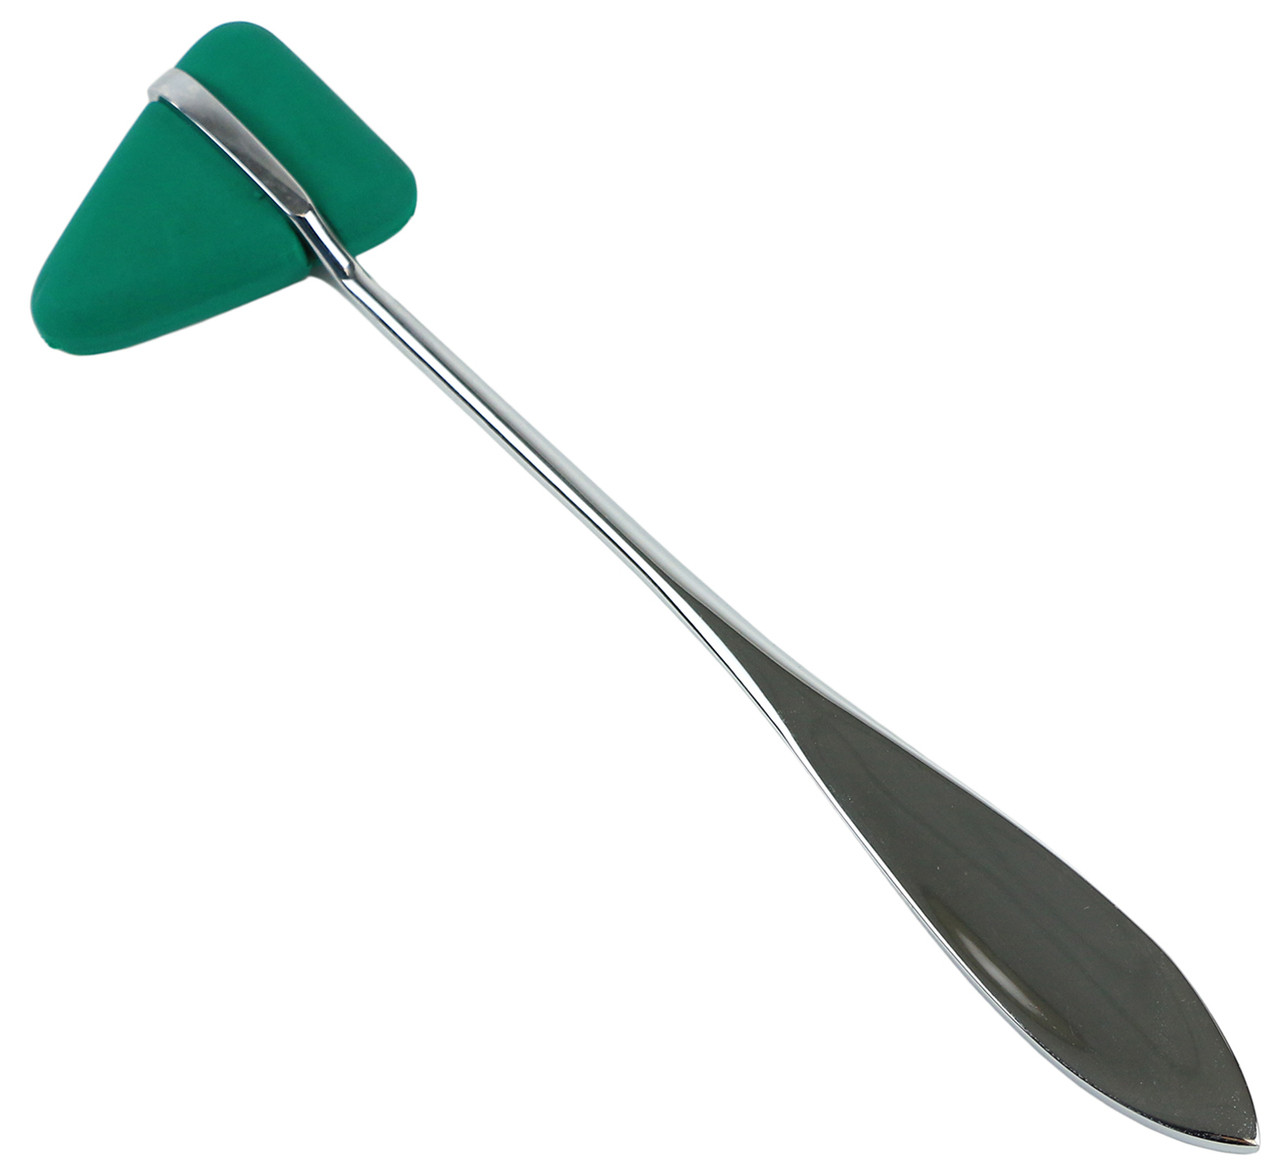 Percussion Hammer - Taylor - Green - Latex Free, 25-pack